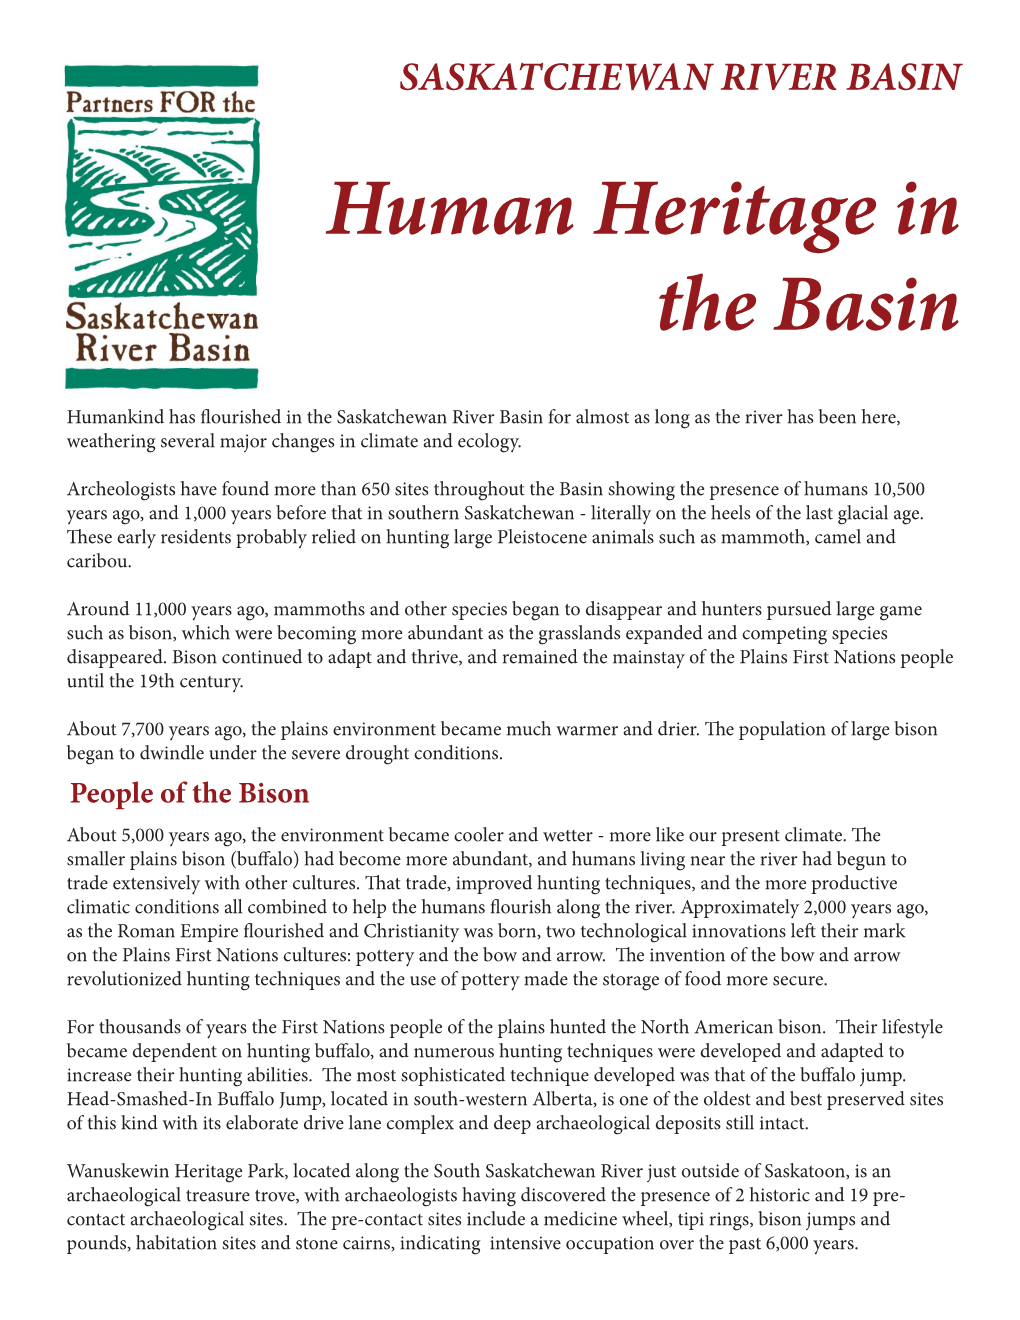 Human Heritage in the Basin.Indd